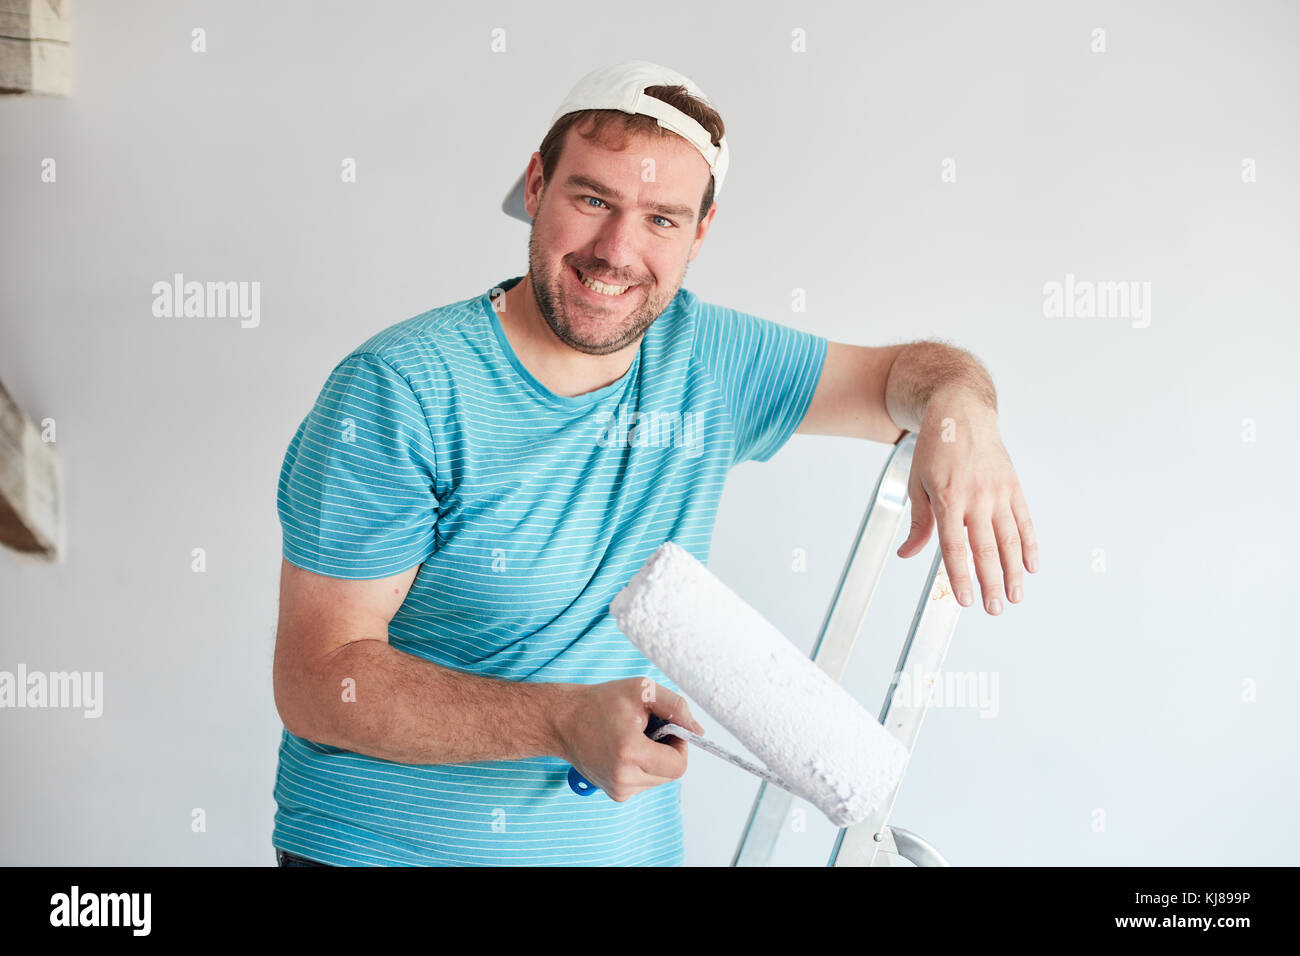 Smiling man holding a roller in front of him Stock Photo